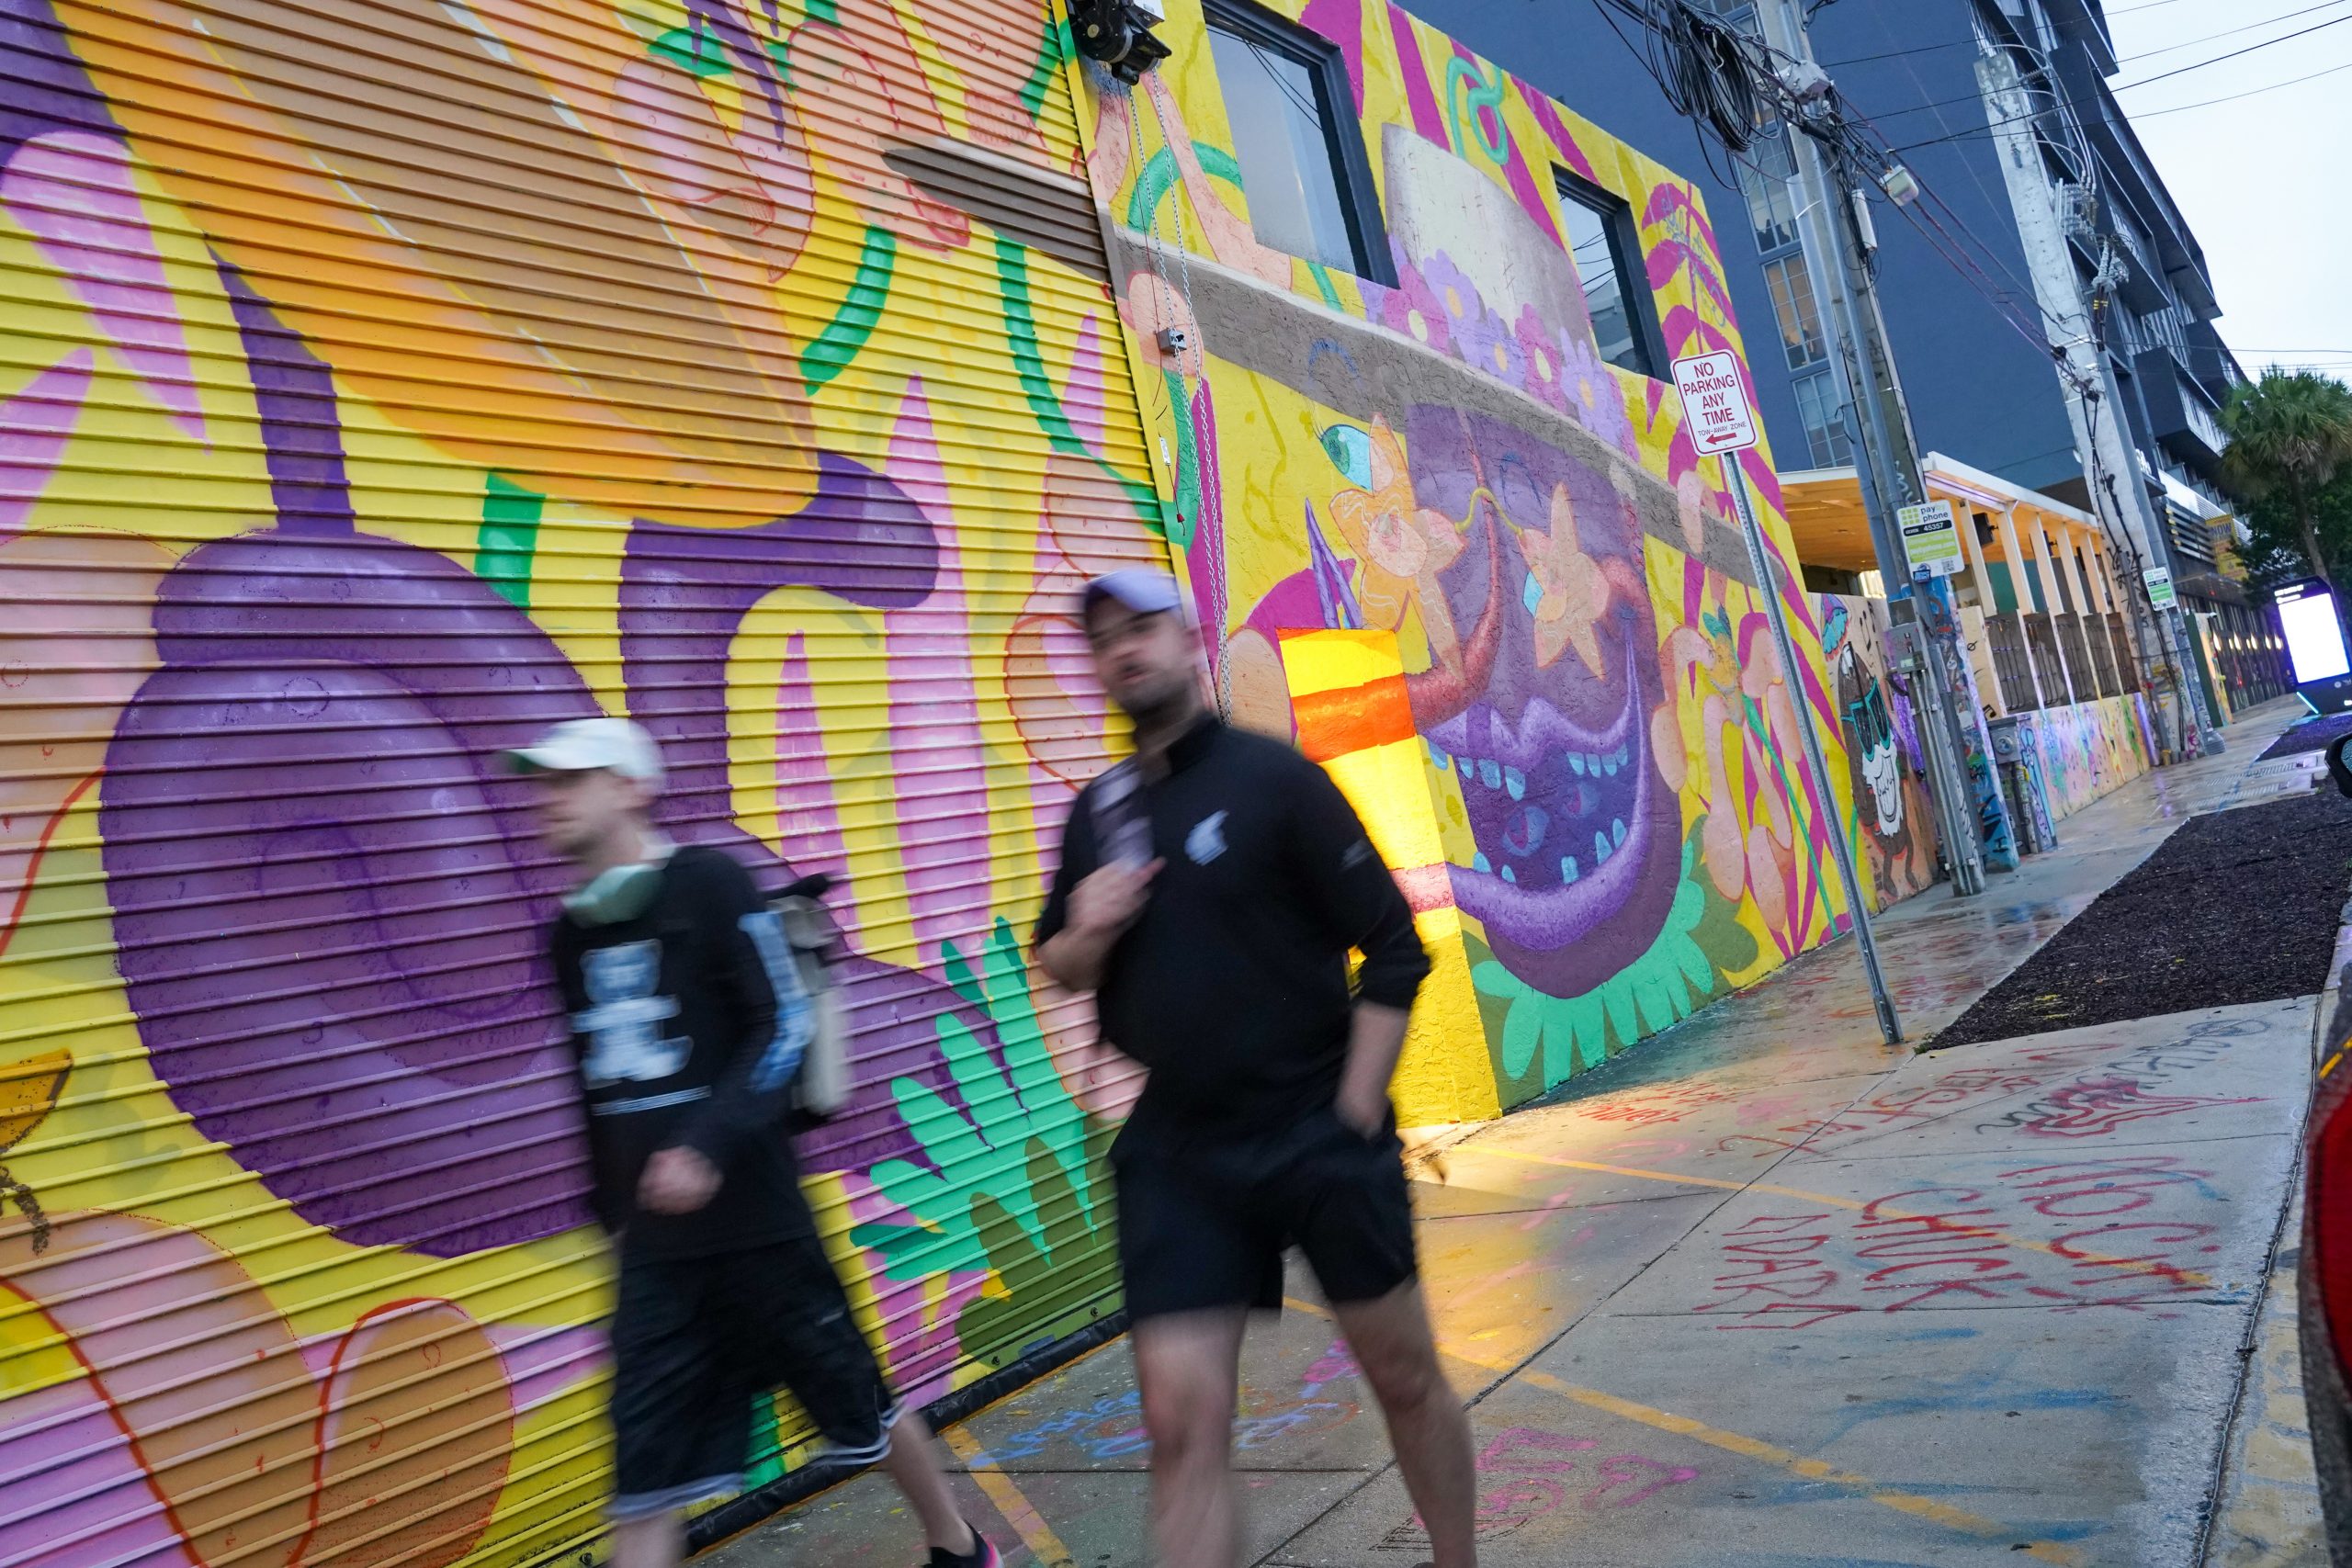 Wynwood Street Art District: A Self-Guided Tour